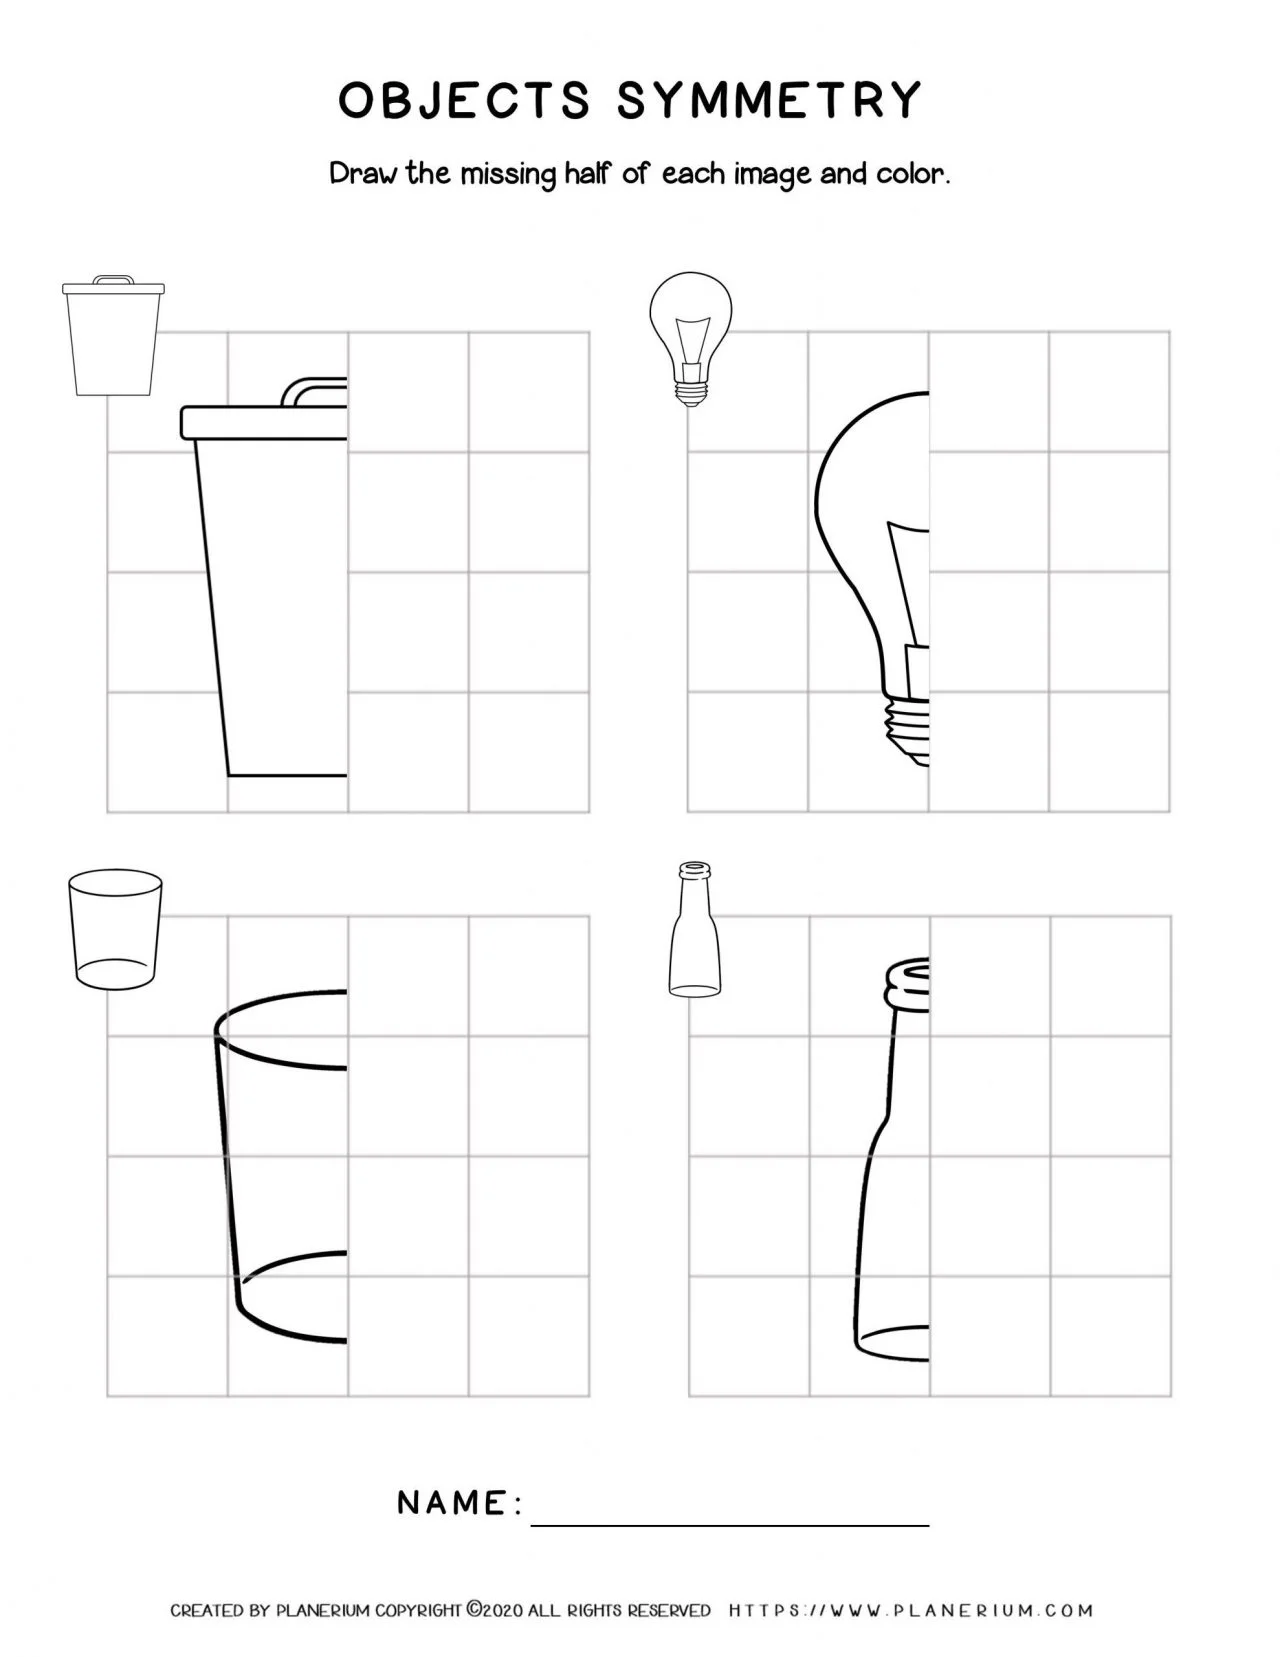 Earth Day Worksheet - Objects Symmetry Activity for Kids